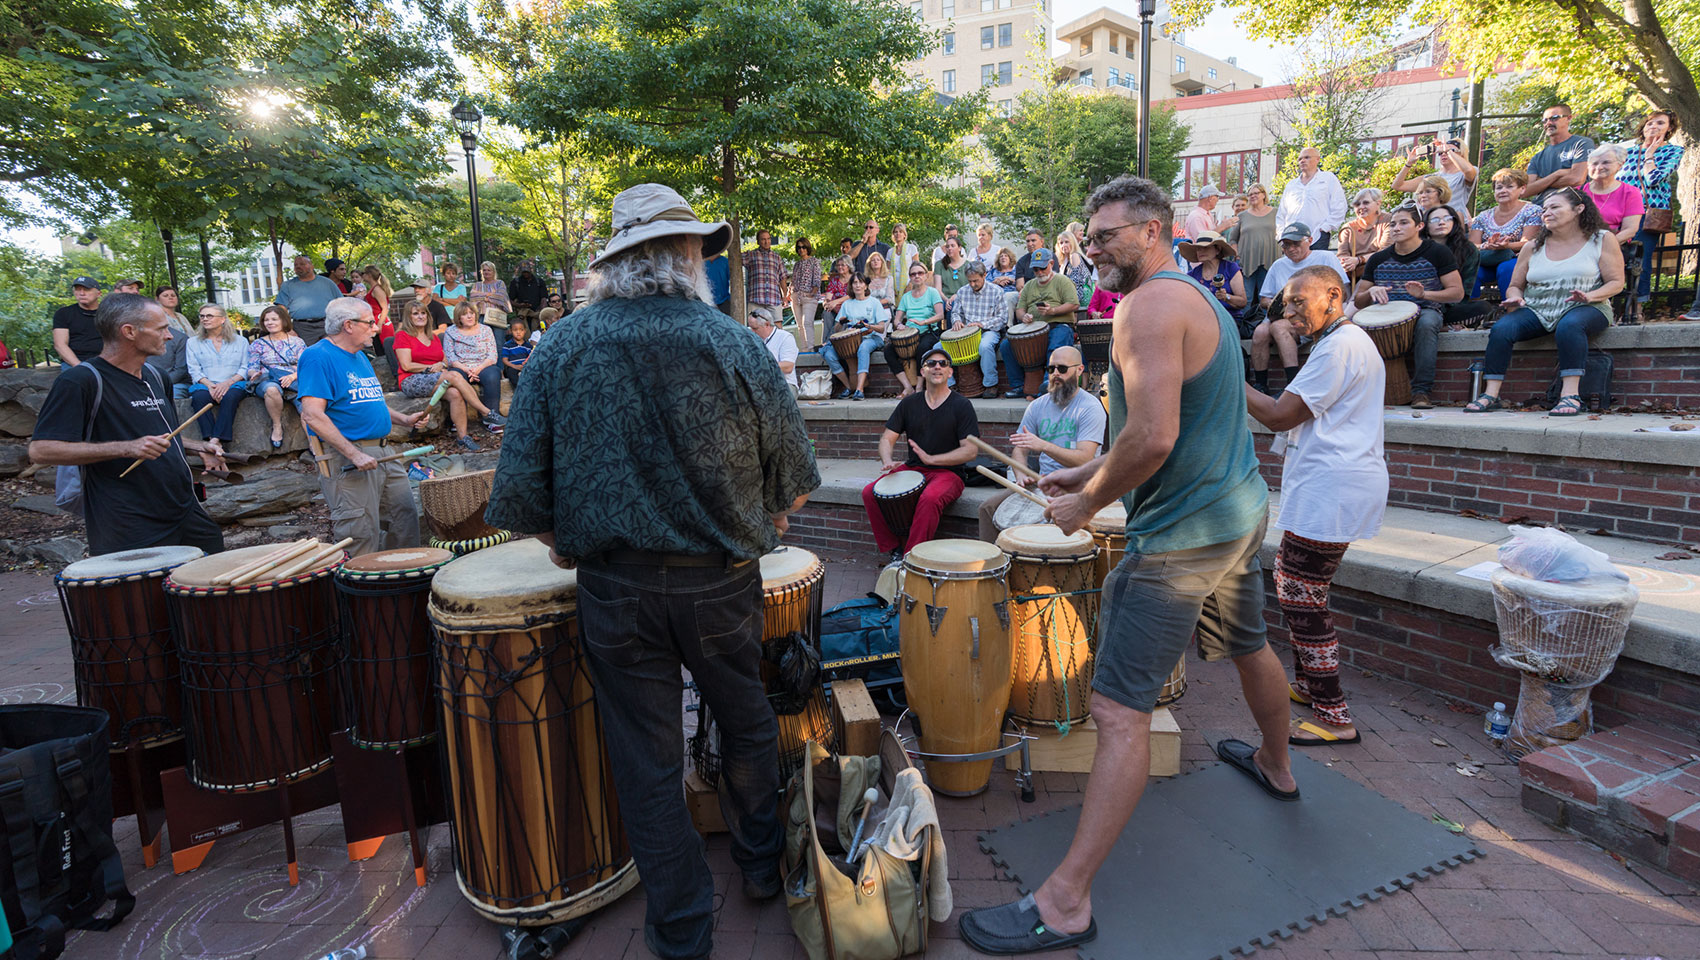 people playing music and using drums